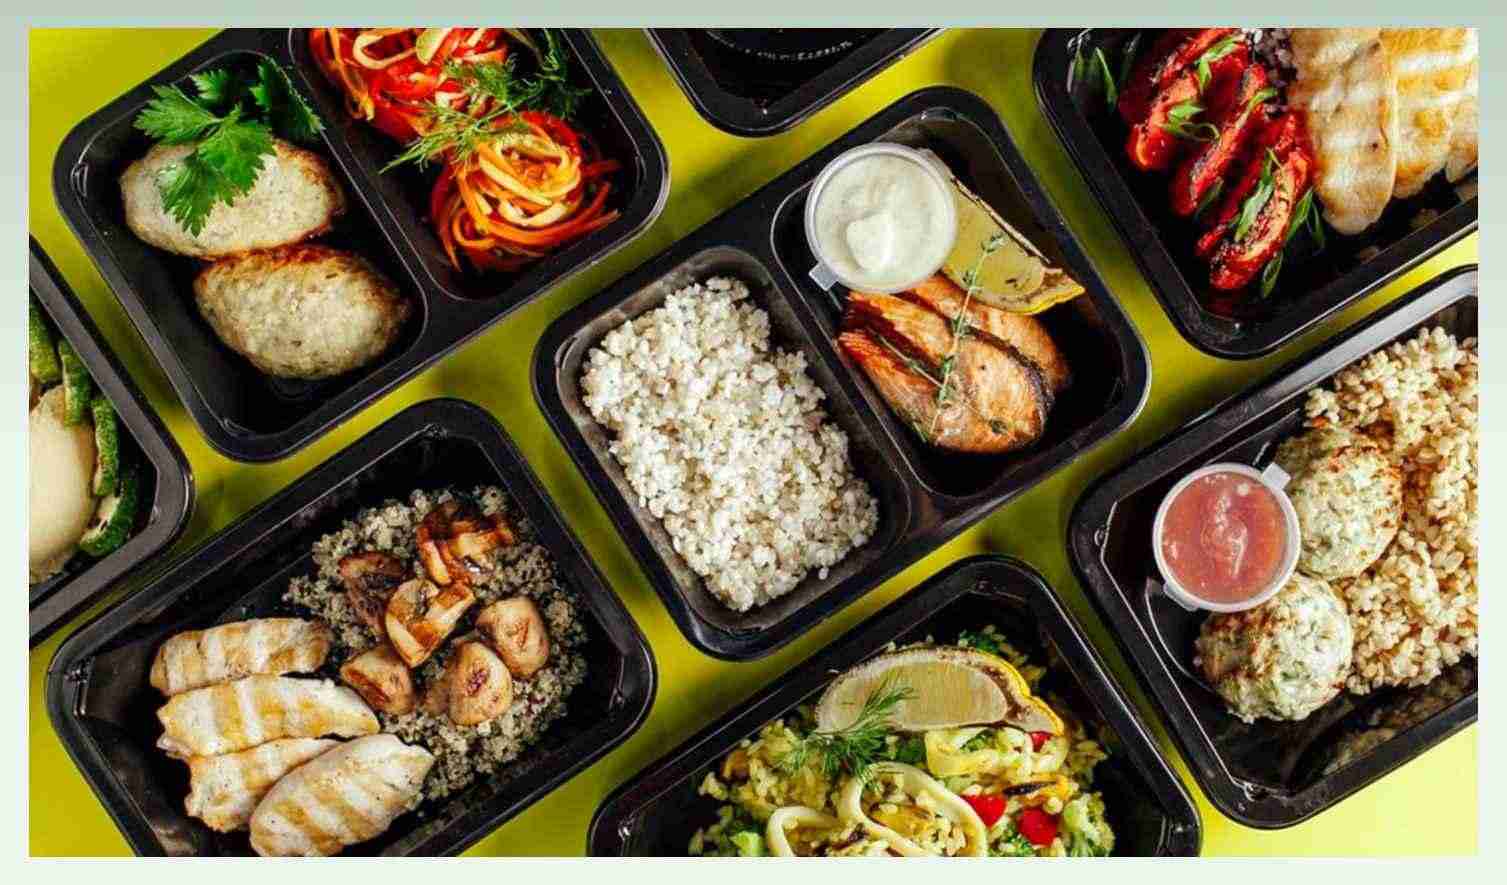 most successful small business ideas - meal prep